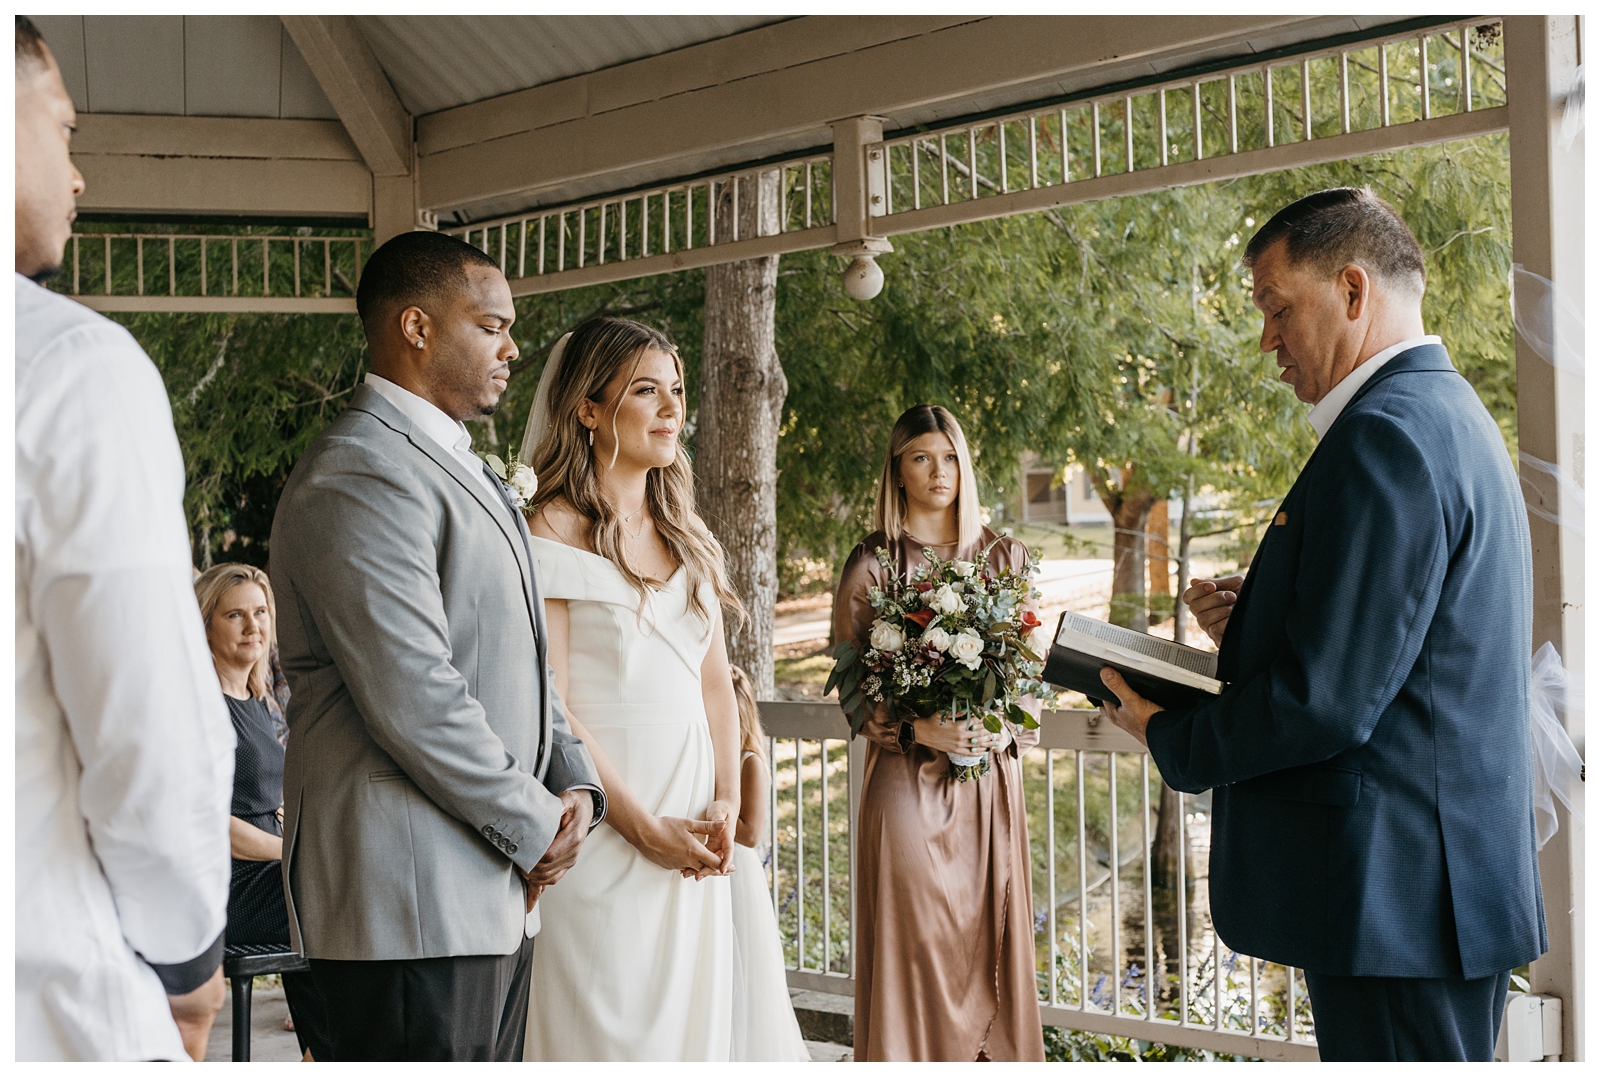 Small intimate elopement